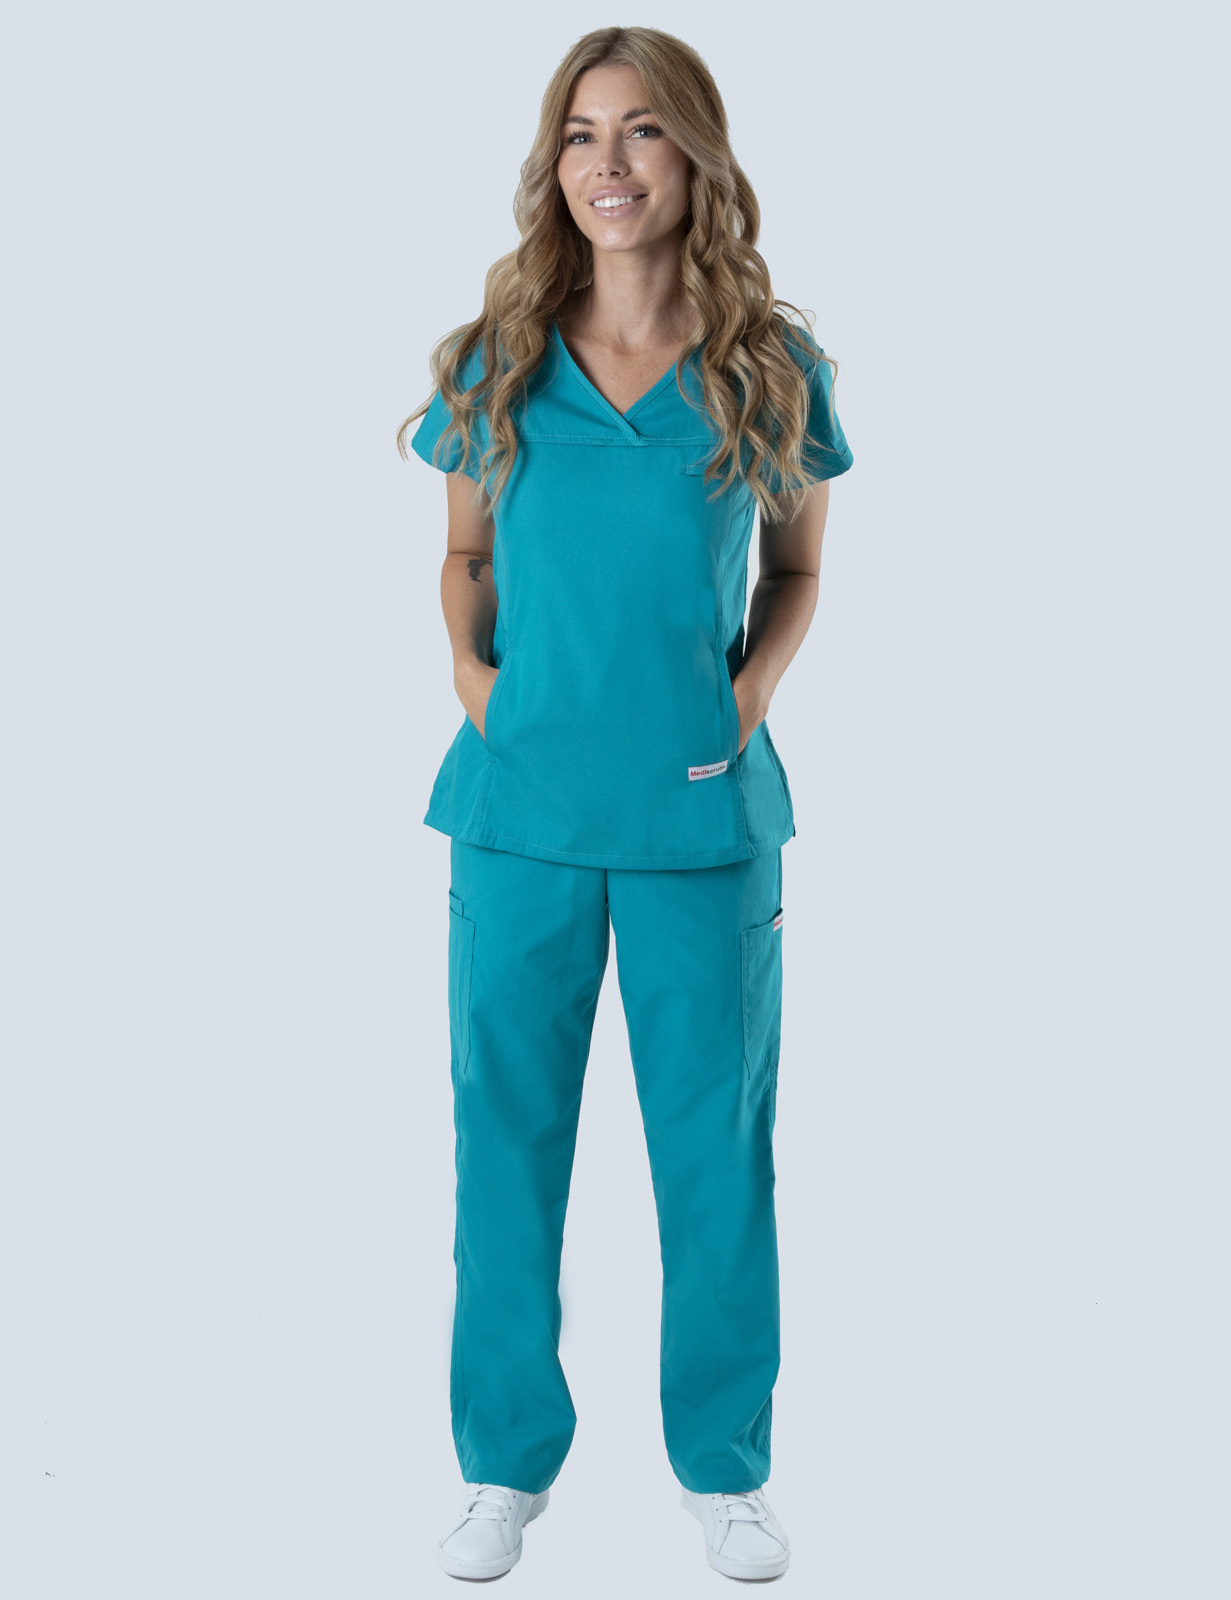 Women's Fit Solid Scrub Top - Teal - X Small